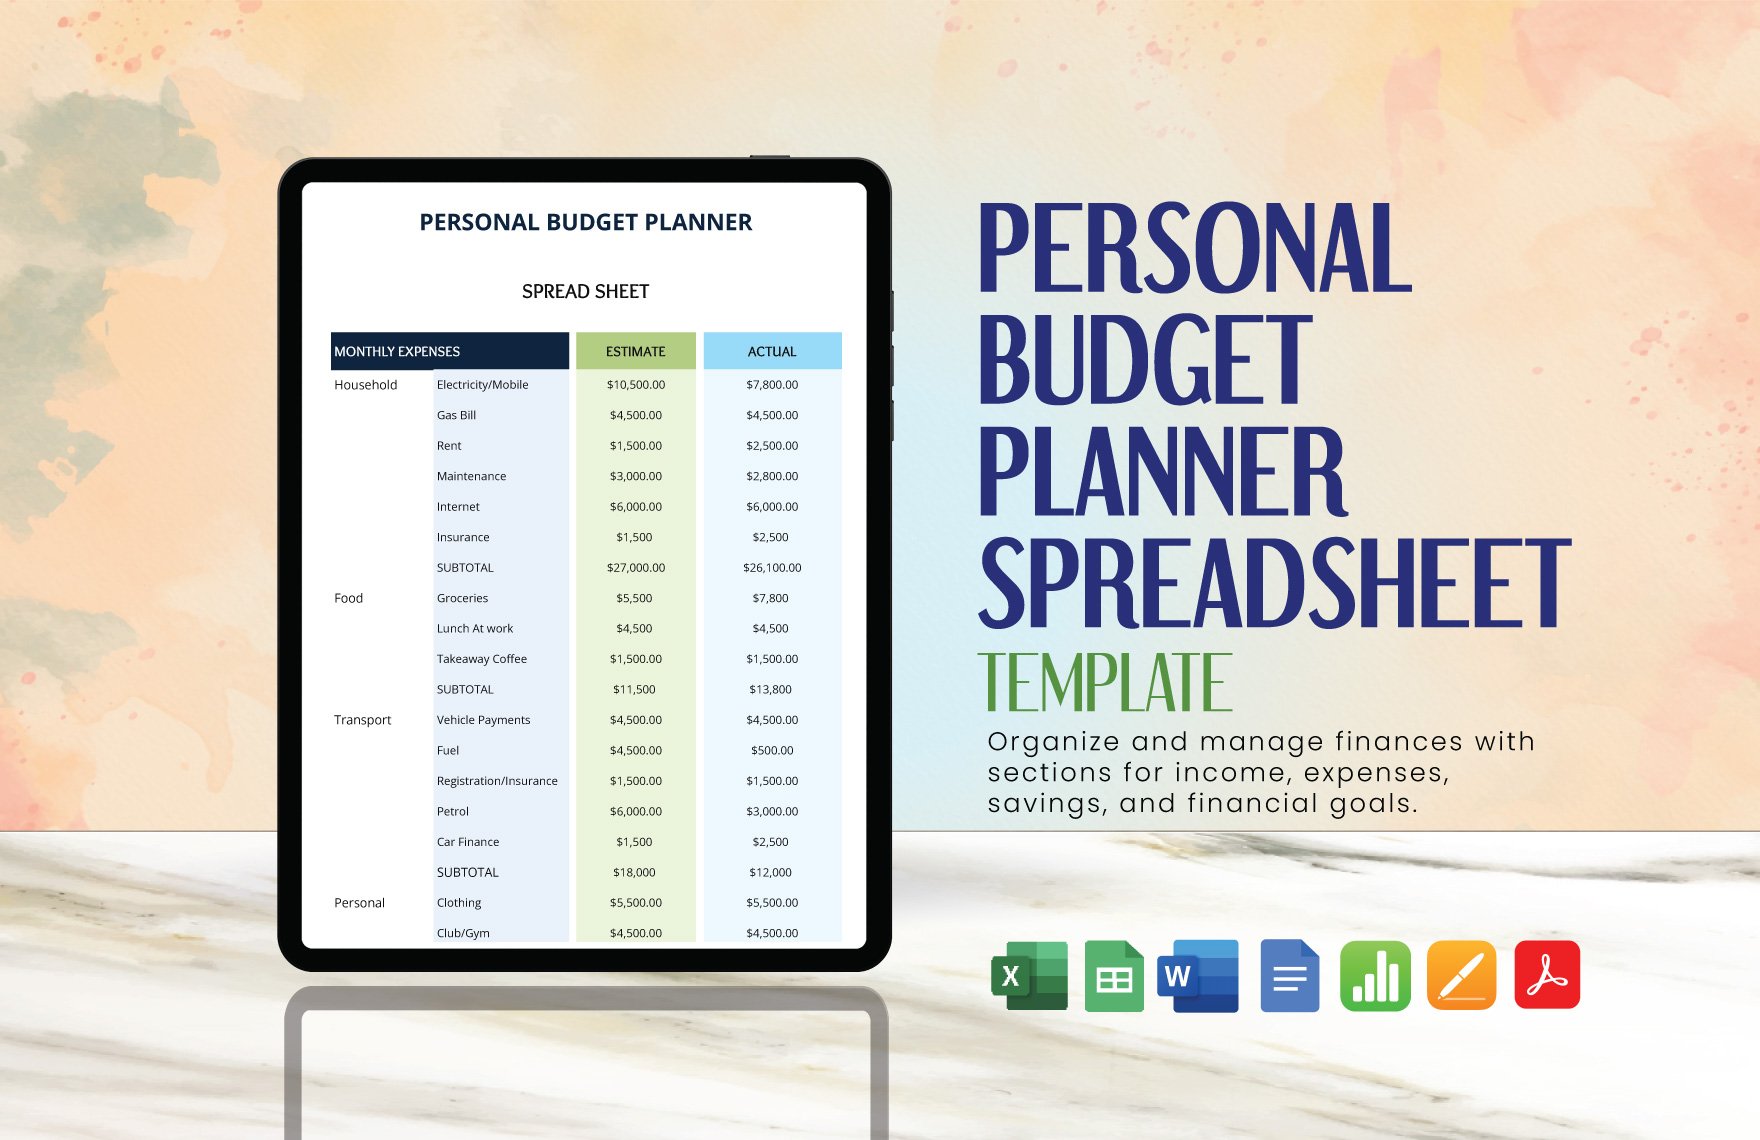 Personal Budget Planner Spreadsheet Template